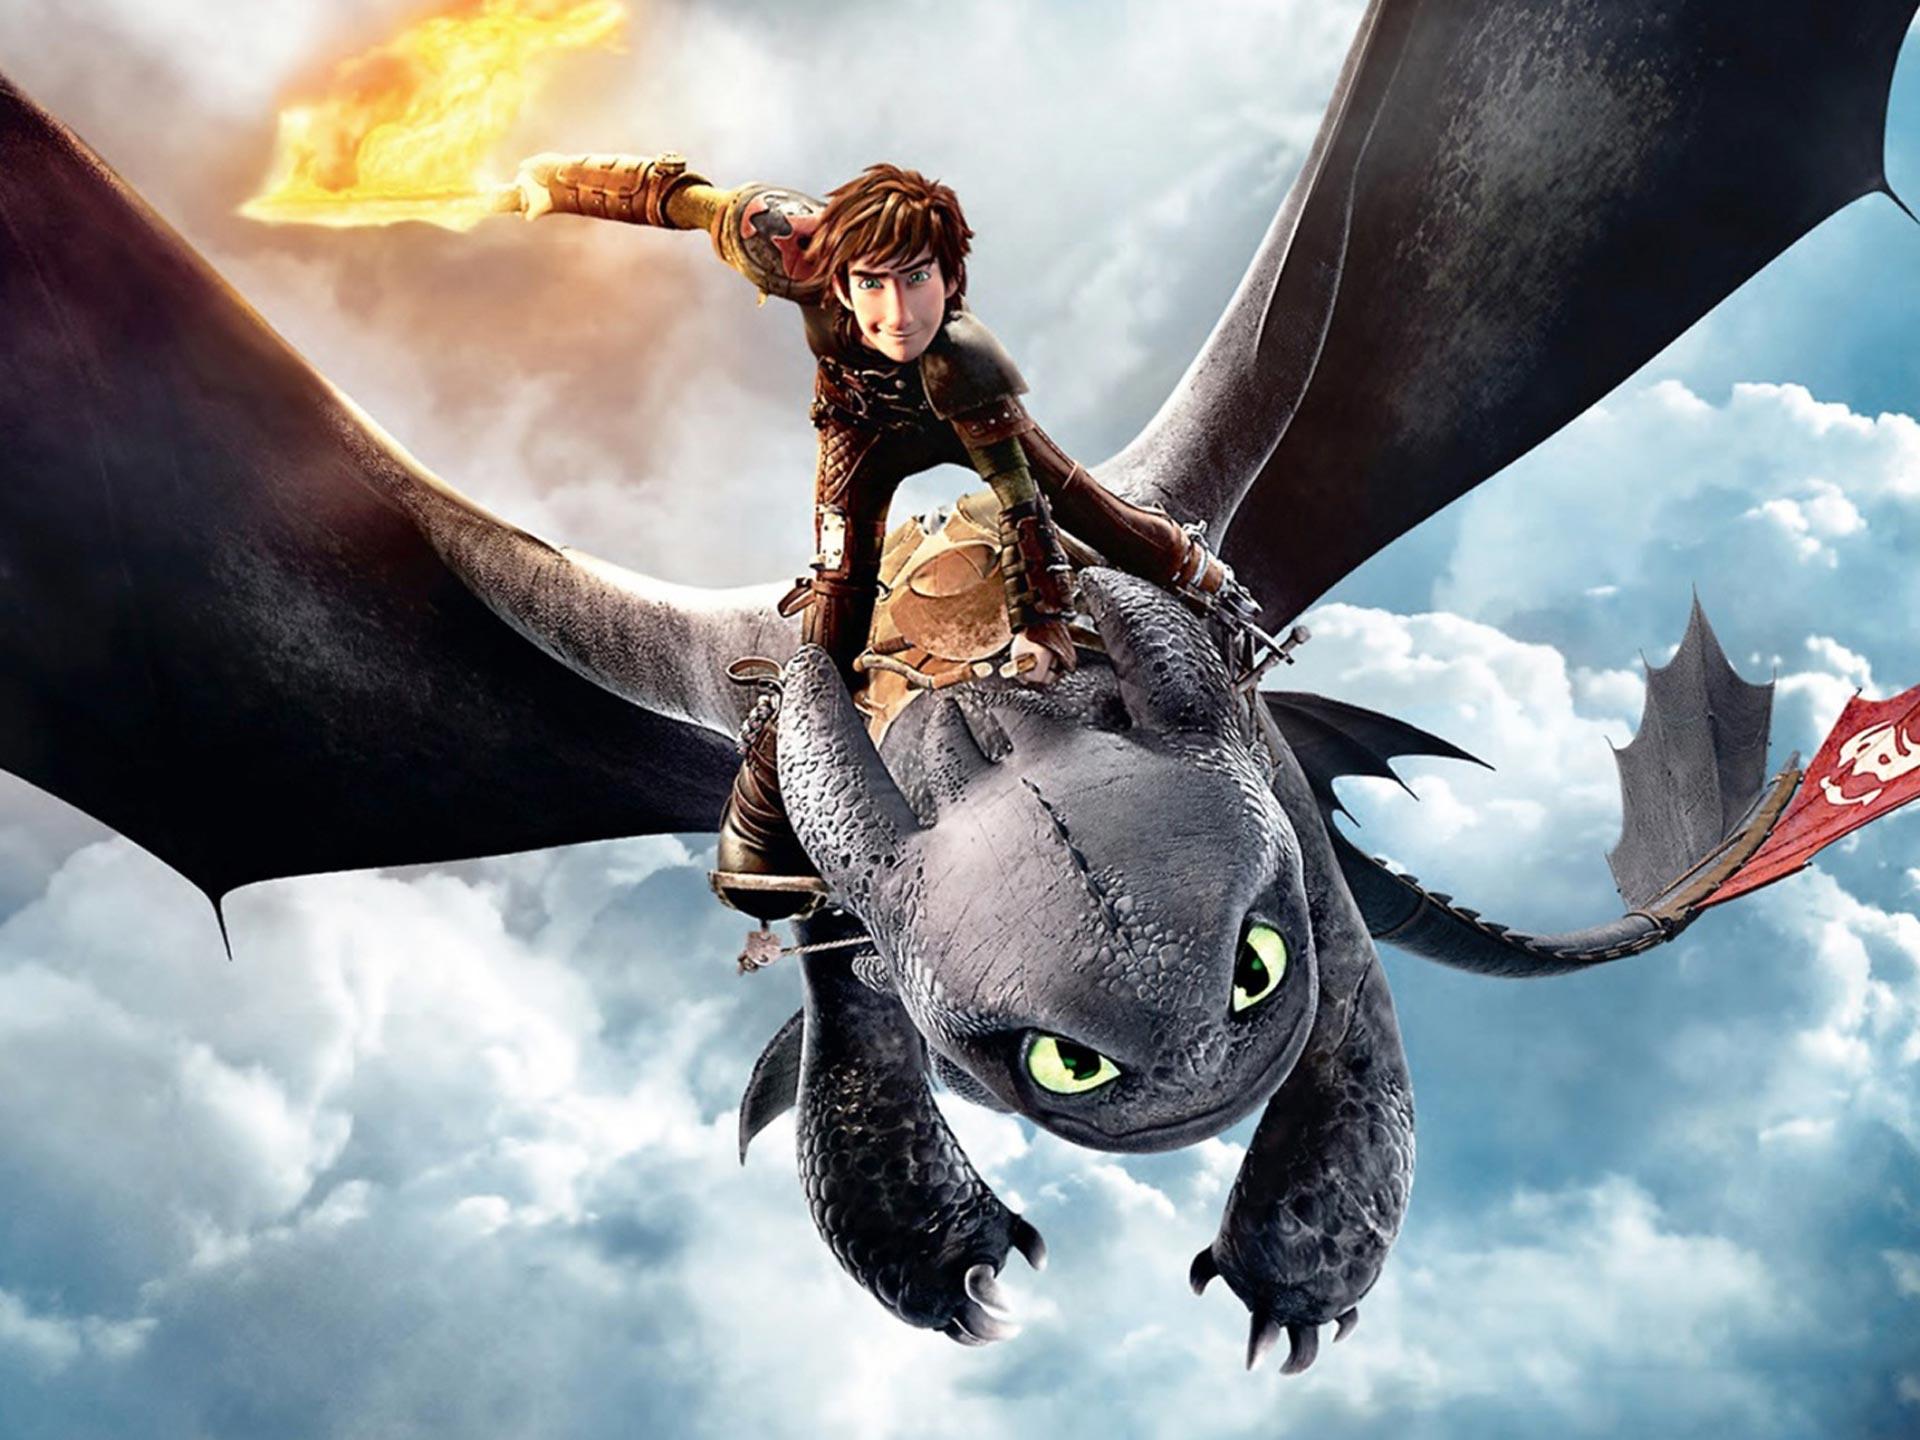 HOW TO TRAIN YOUR DRAGON 2 Wallpaper HD Background